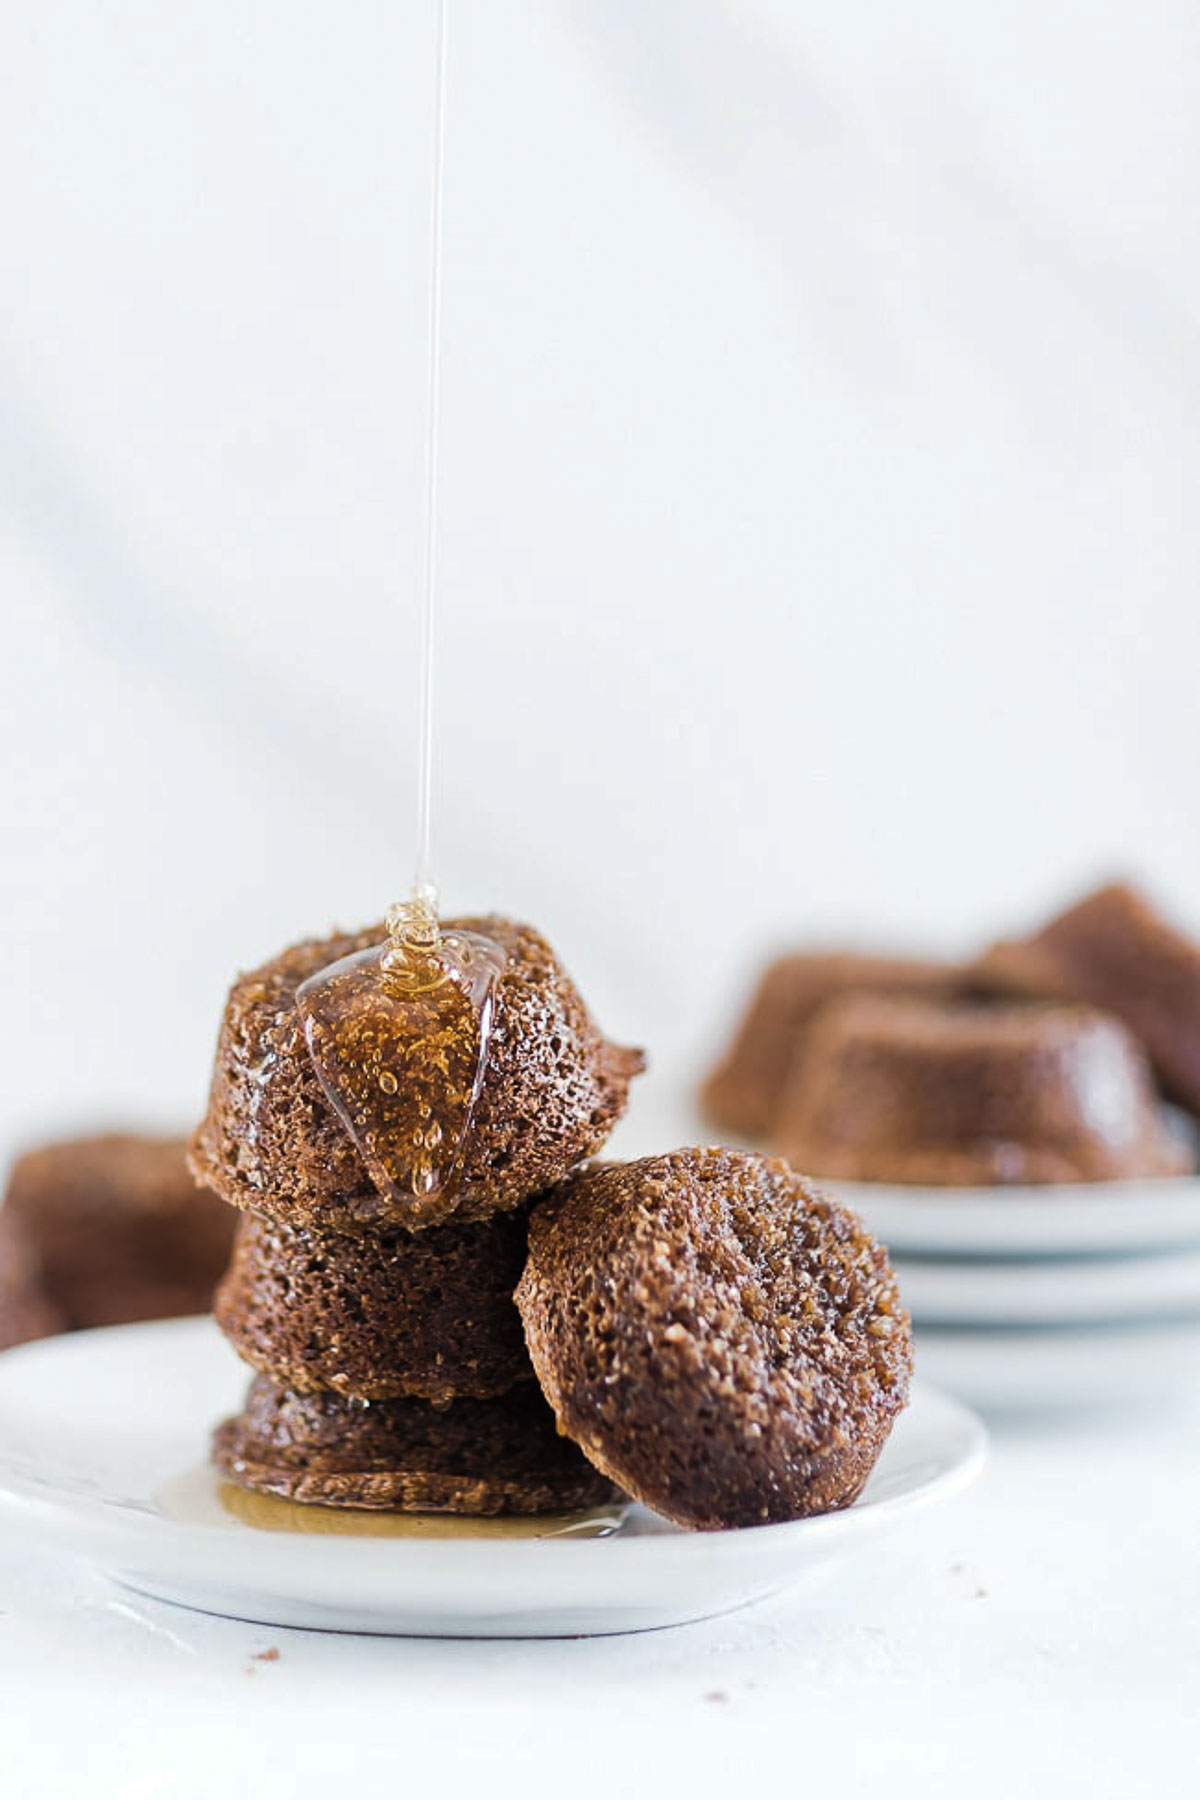 Molasses bran muffins stacked on a white plate. with syrup pouring over top.